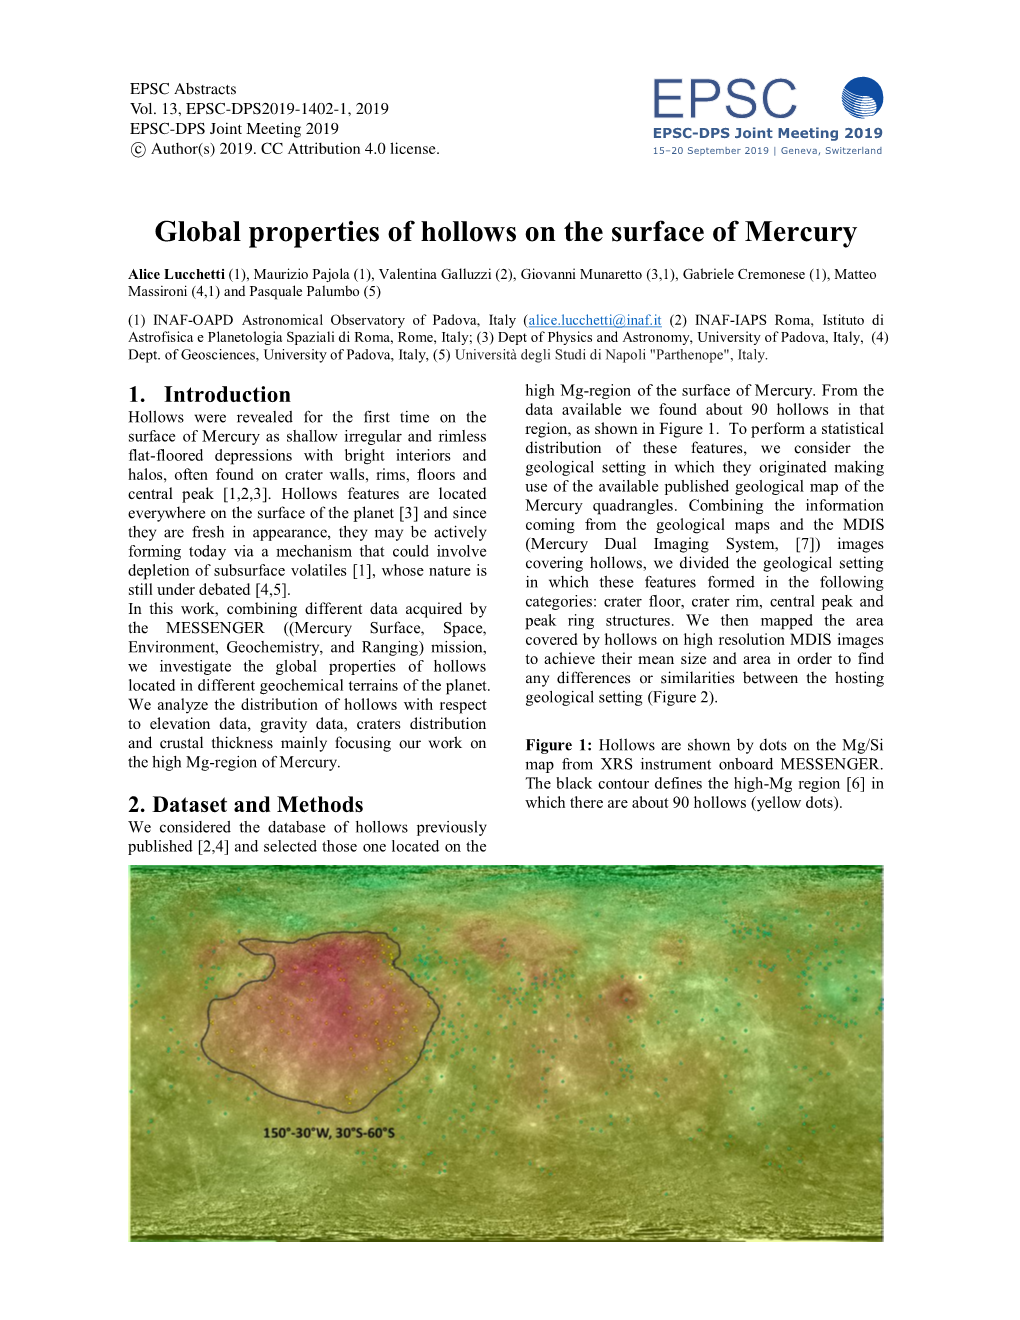 Global Properties of Hollows on the Surface of Mercury